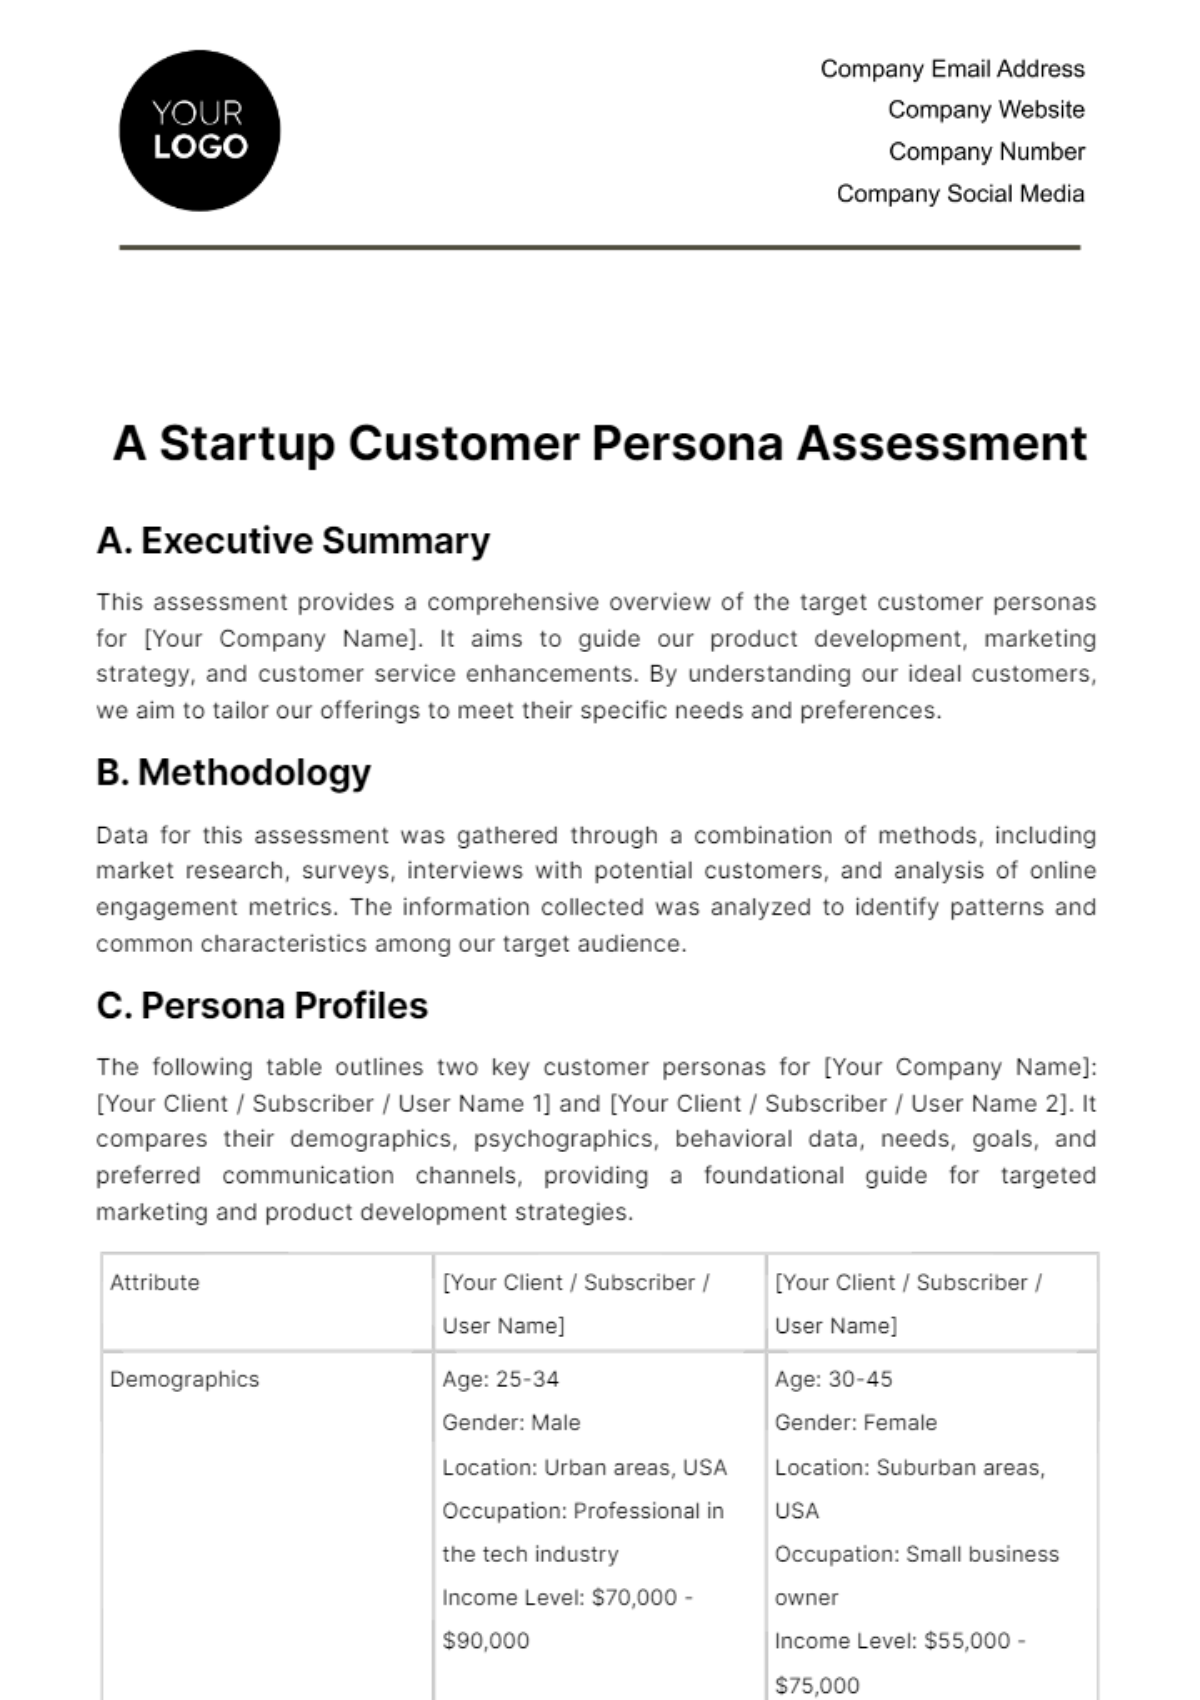 Startup Customer Persona Assessment Template